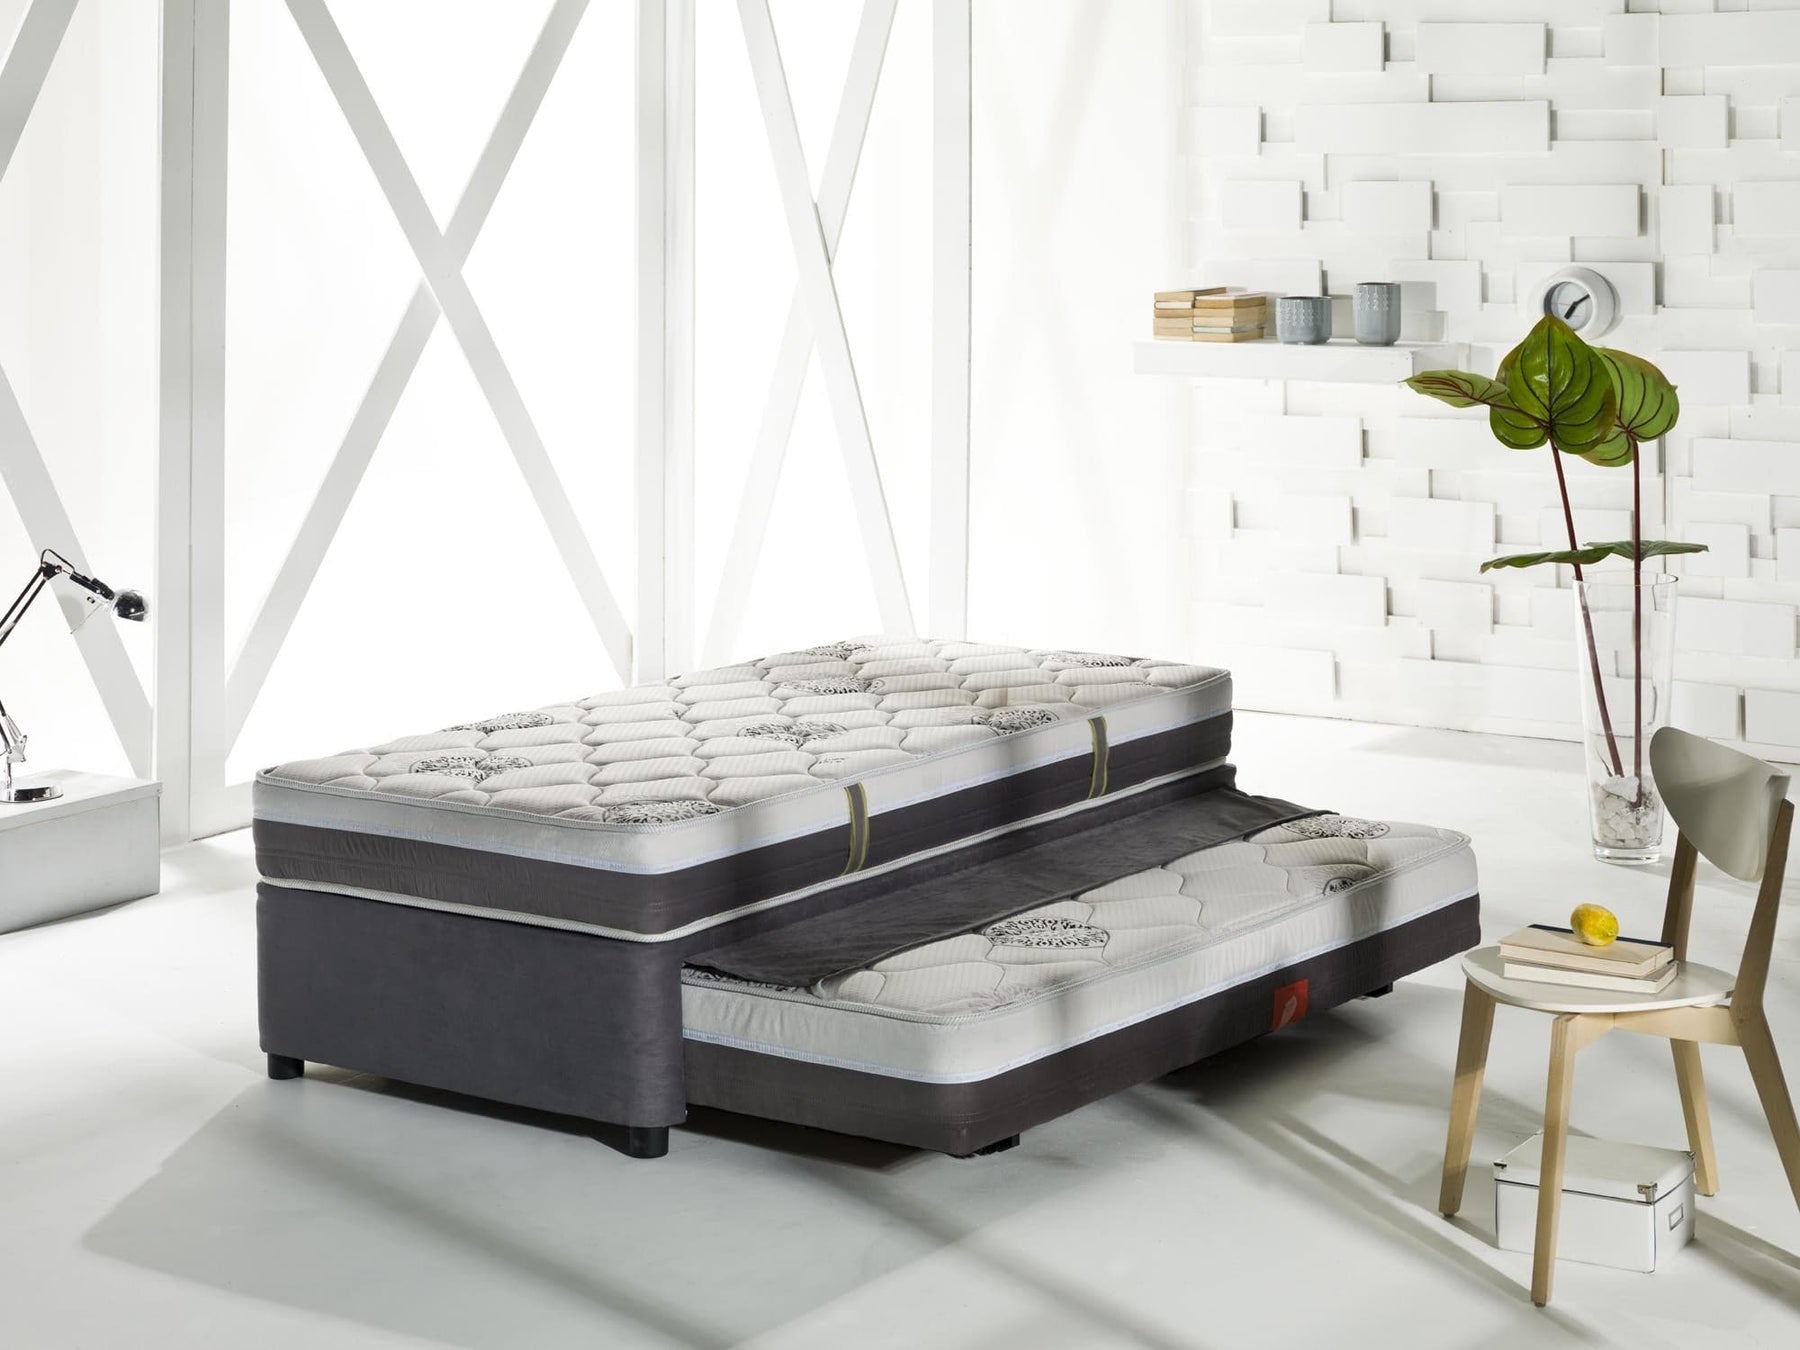 Four Season High Rise With Extra Mattress by Bellona